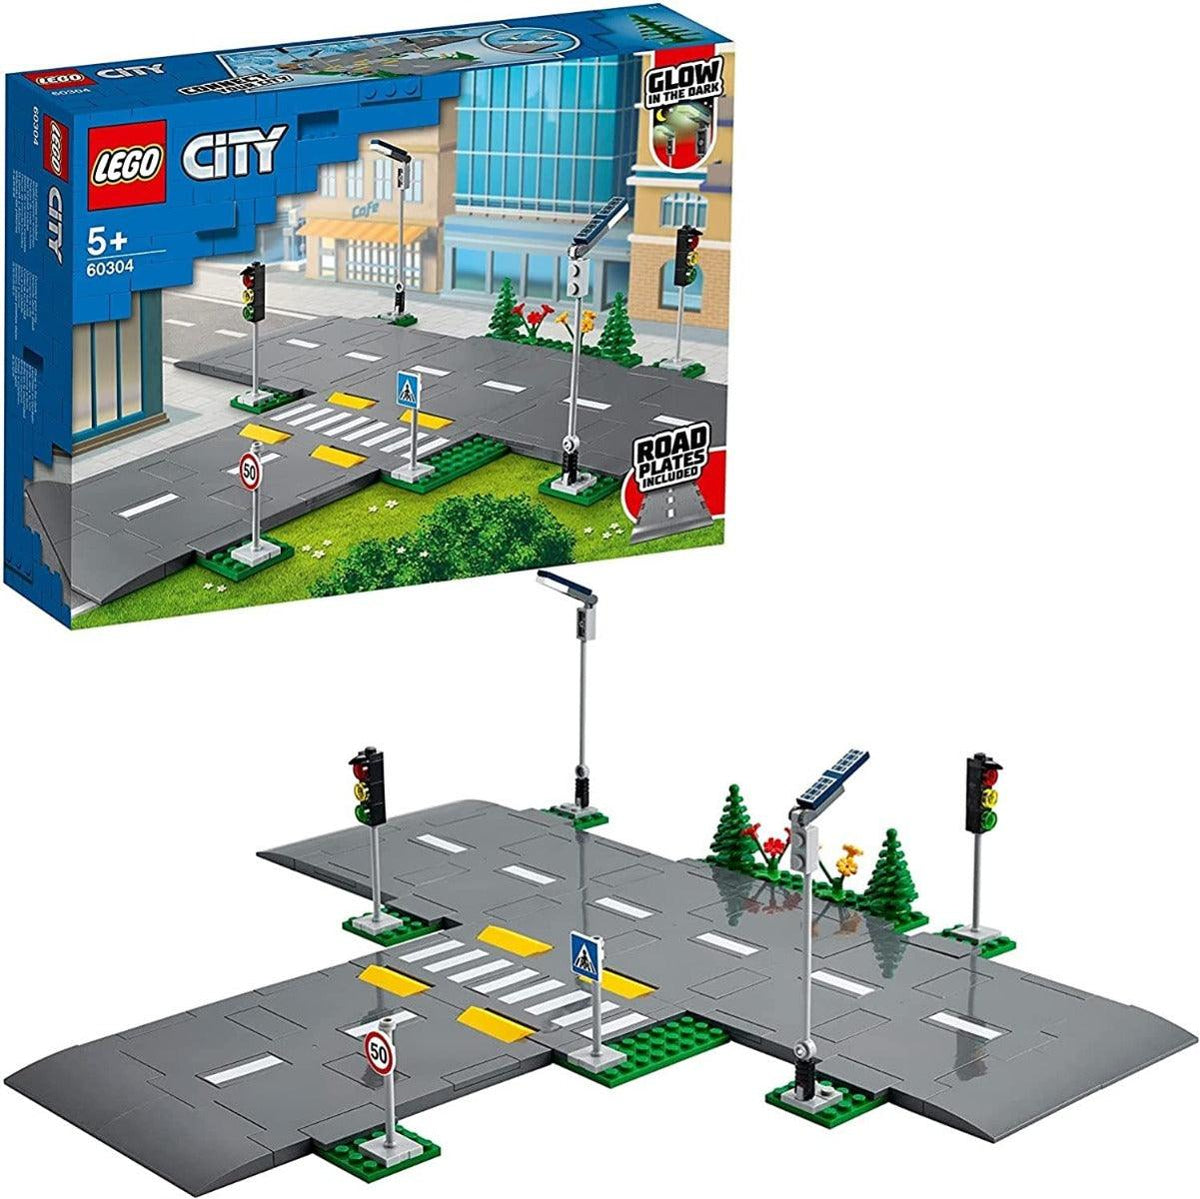 LEGO City Road Plates with Traffic Lights and Glow Building Kit for Ages 5+